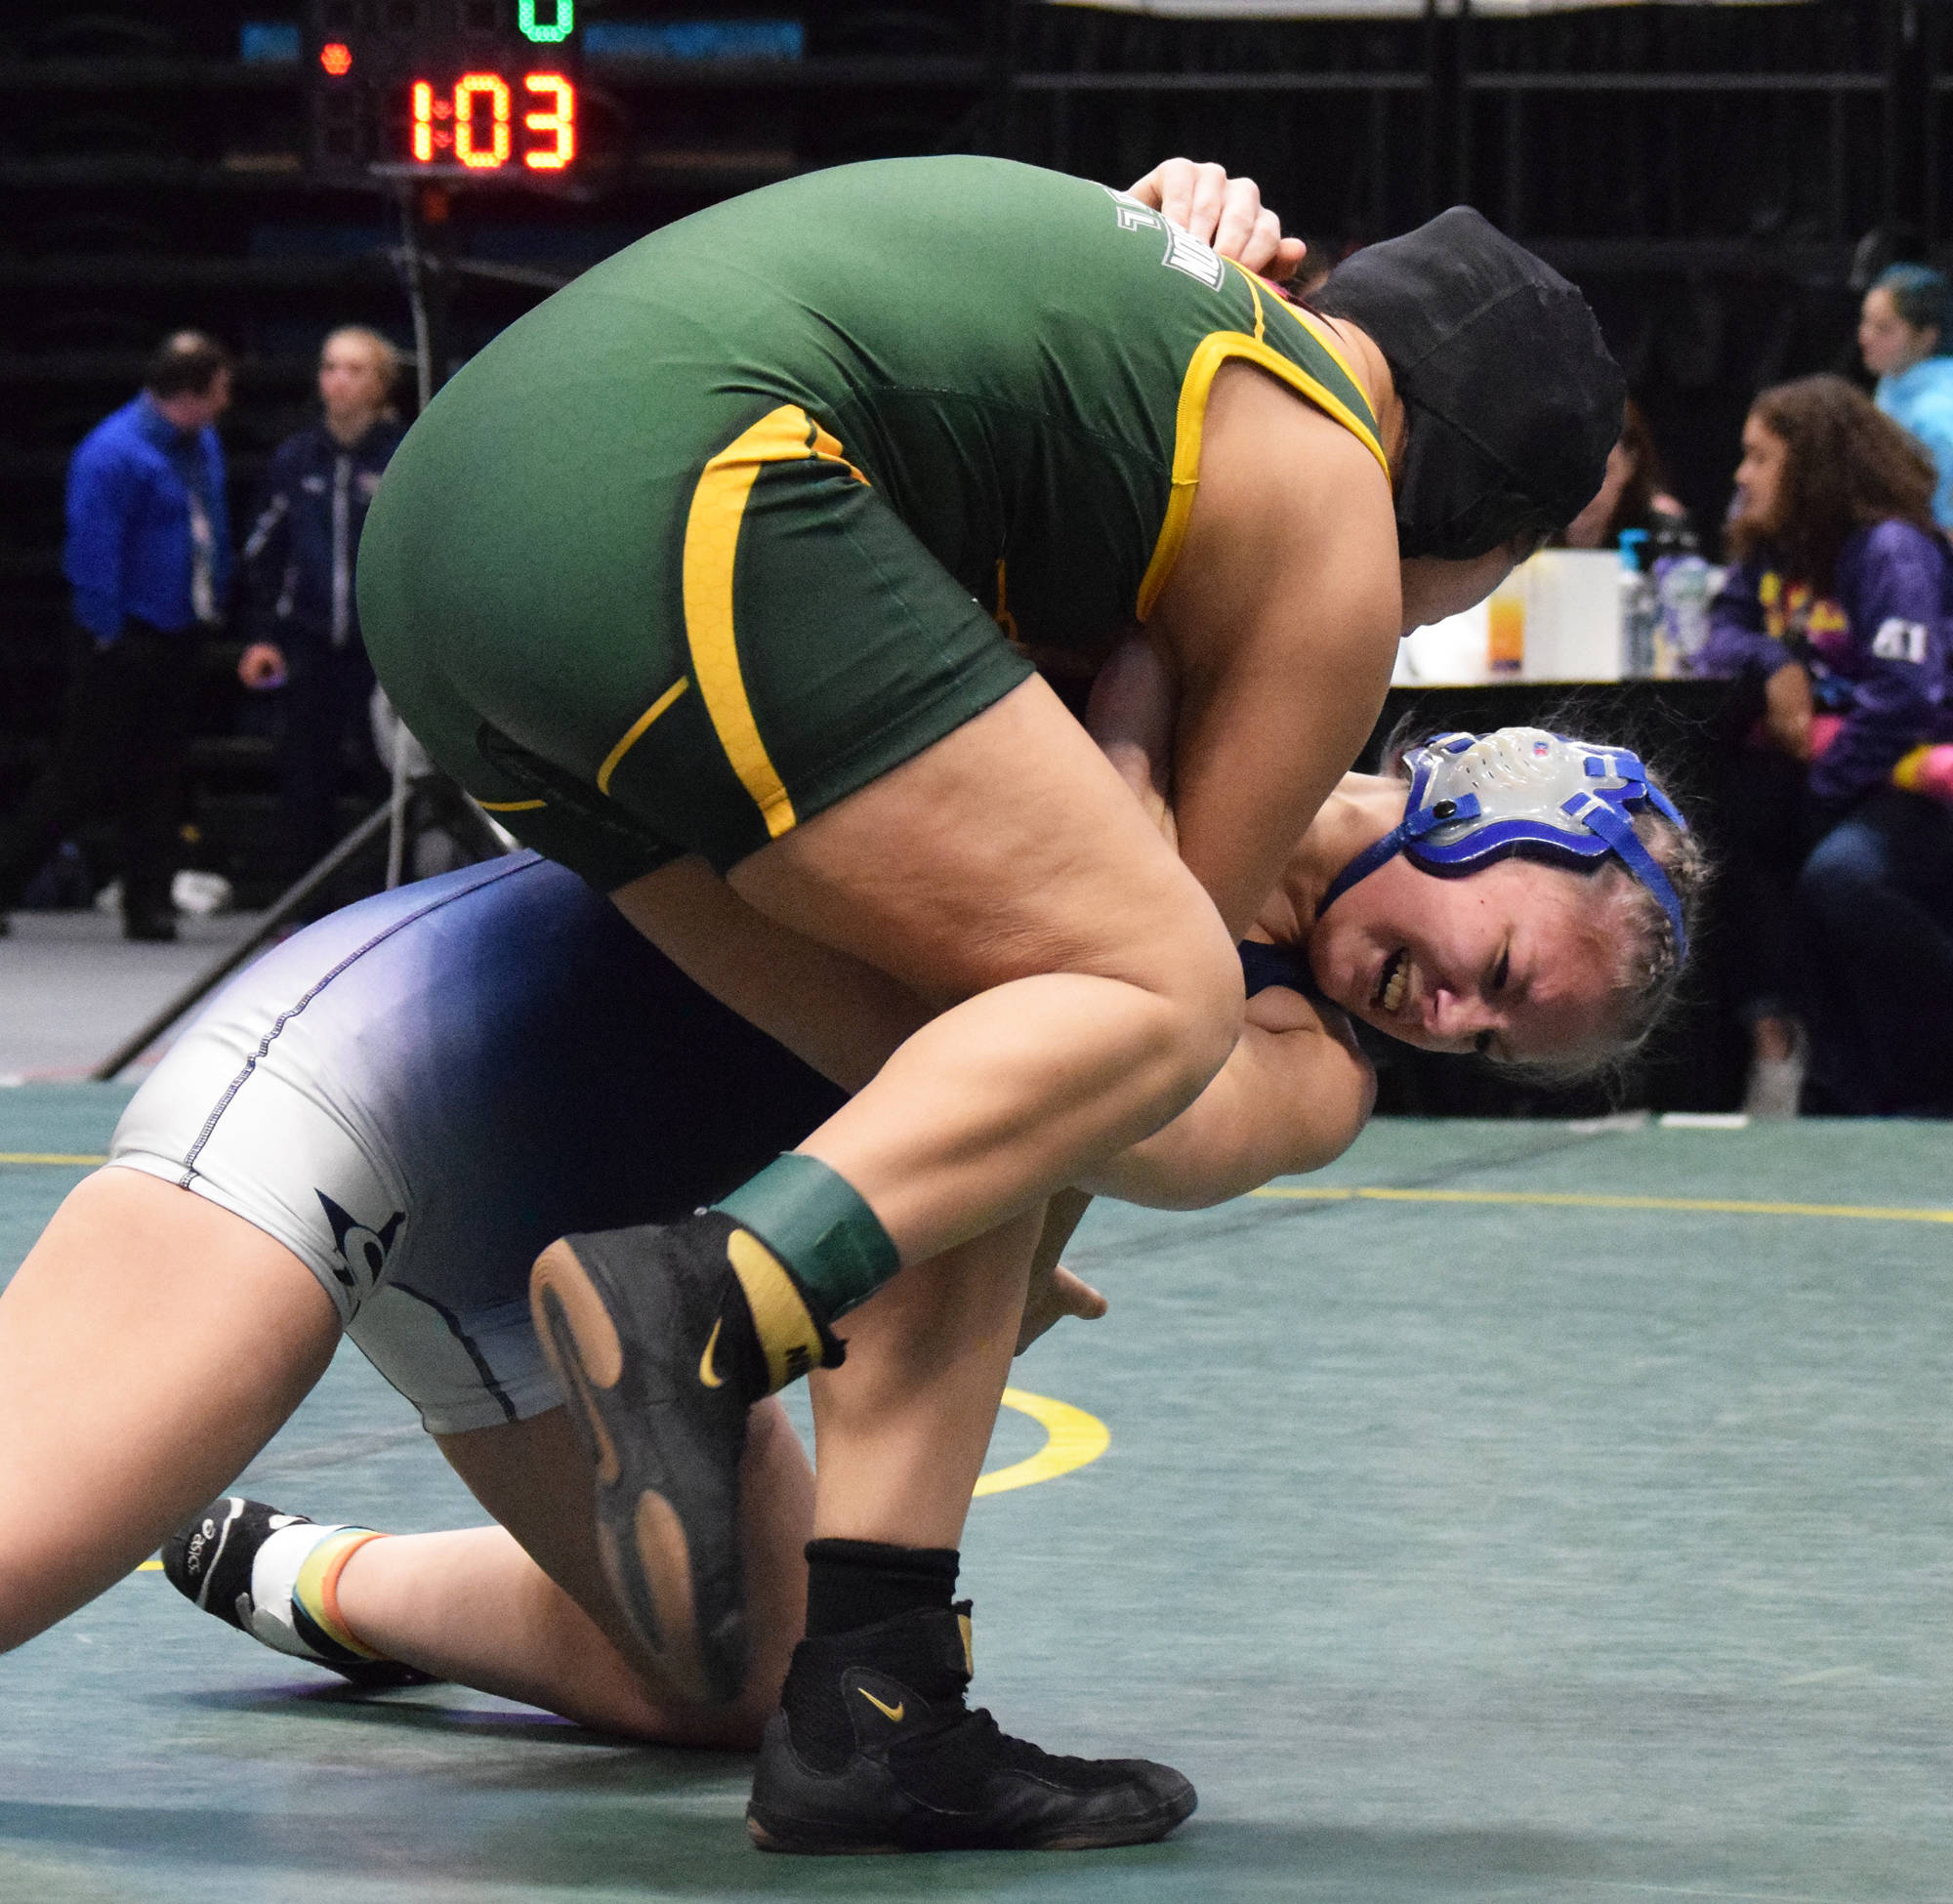 Soldotna’s Amanda Wylie grapples with Alaina Pete of Brevig Mission in the girls 160-pound final Saturday, Dec. 21, 2019, at the ASAA State Wrestling Championships at the Alaska Airlines Center in Anchorage, Alaska. (Photo by Joey Klecka/Peninsula Clarion)